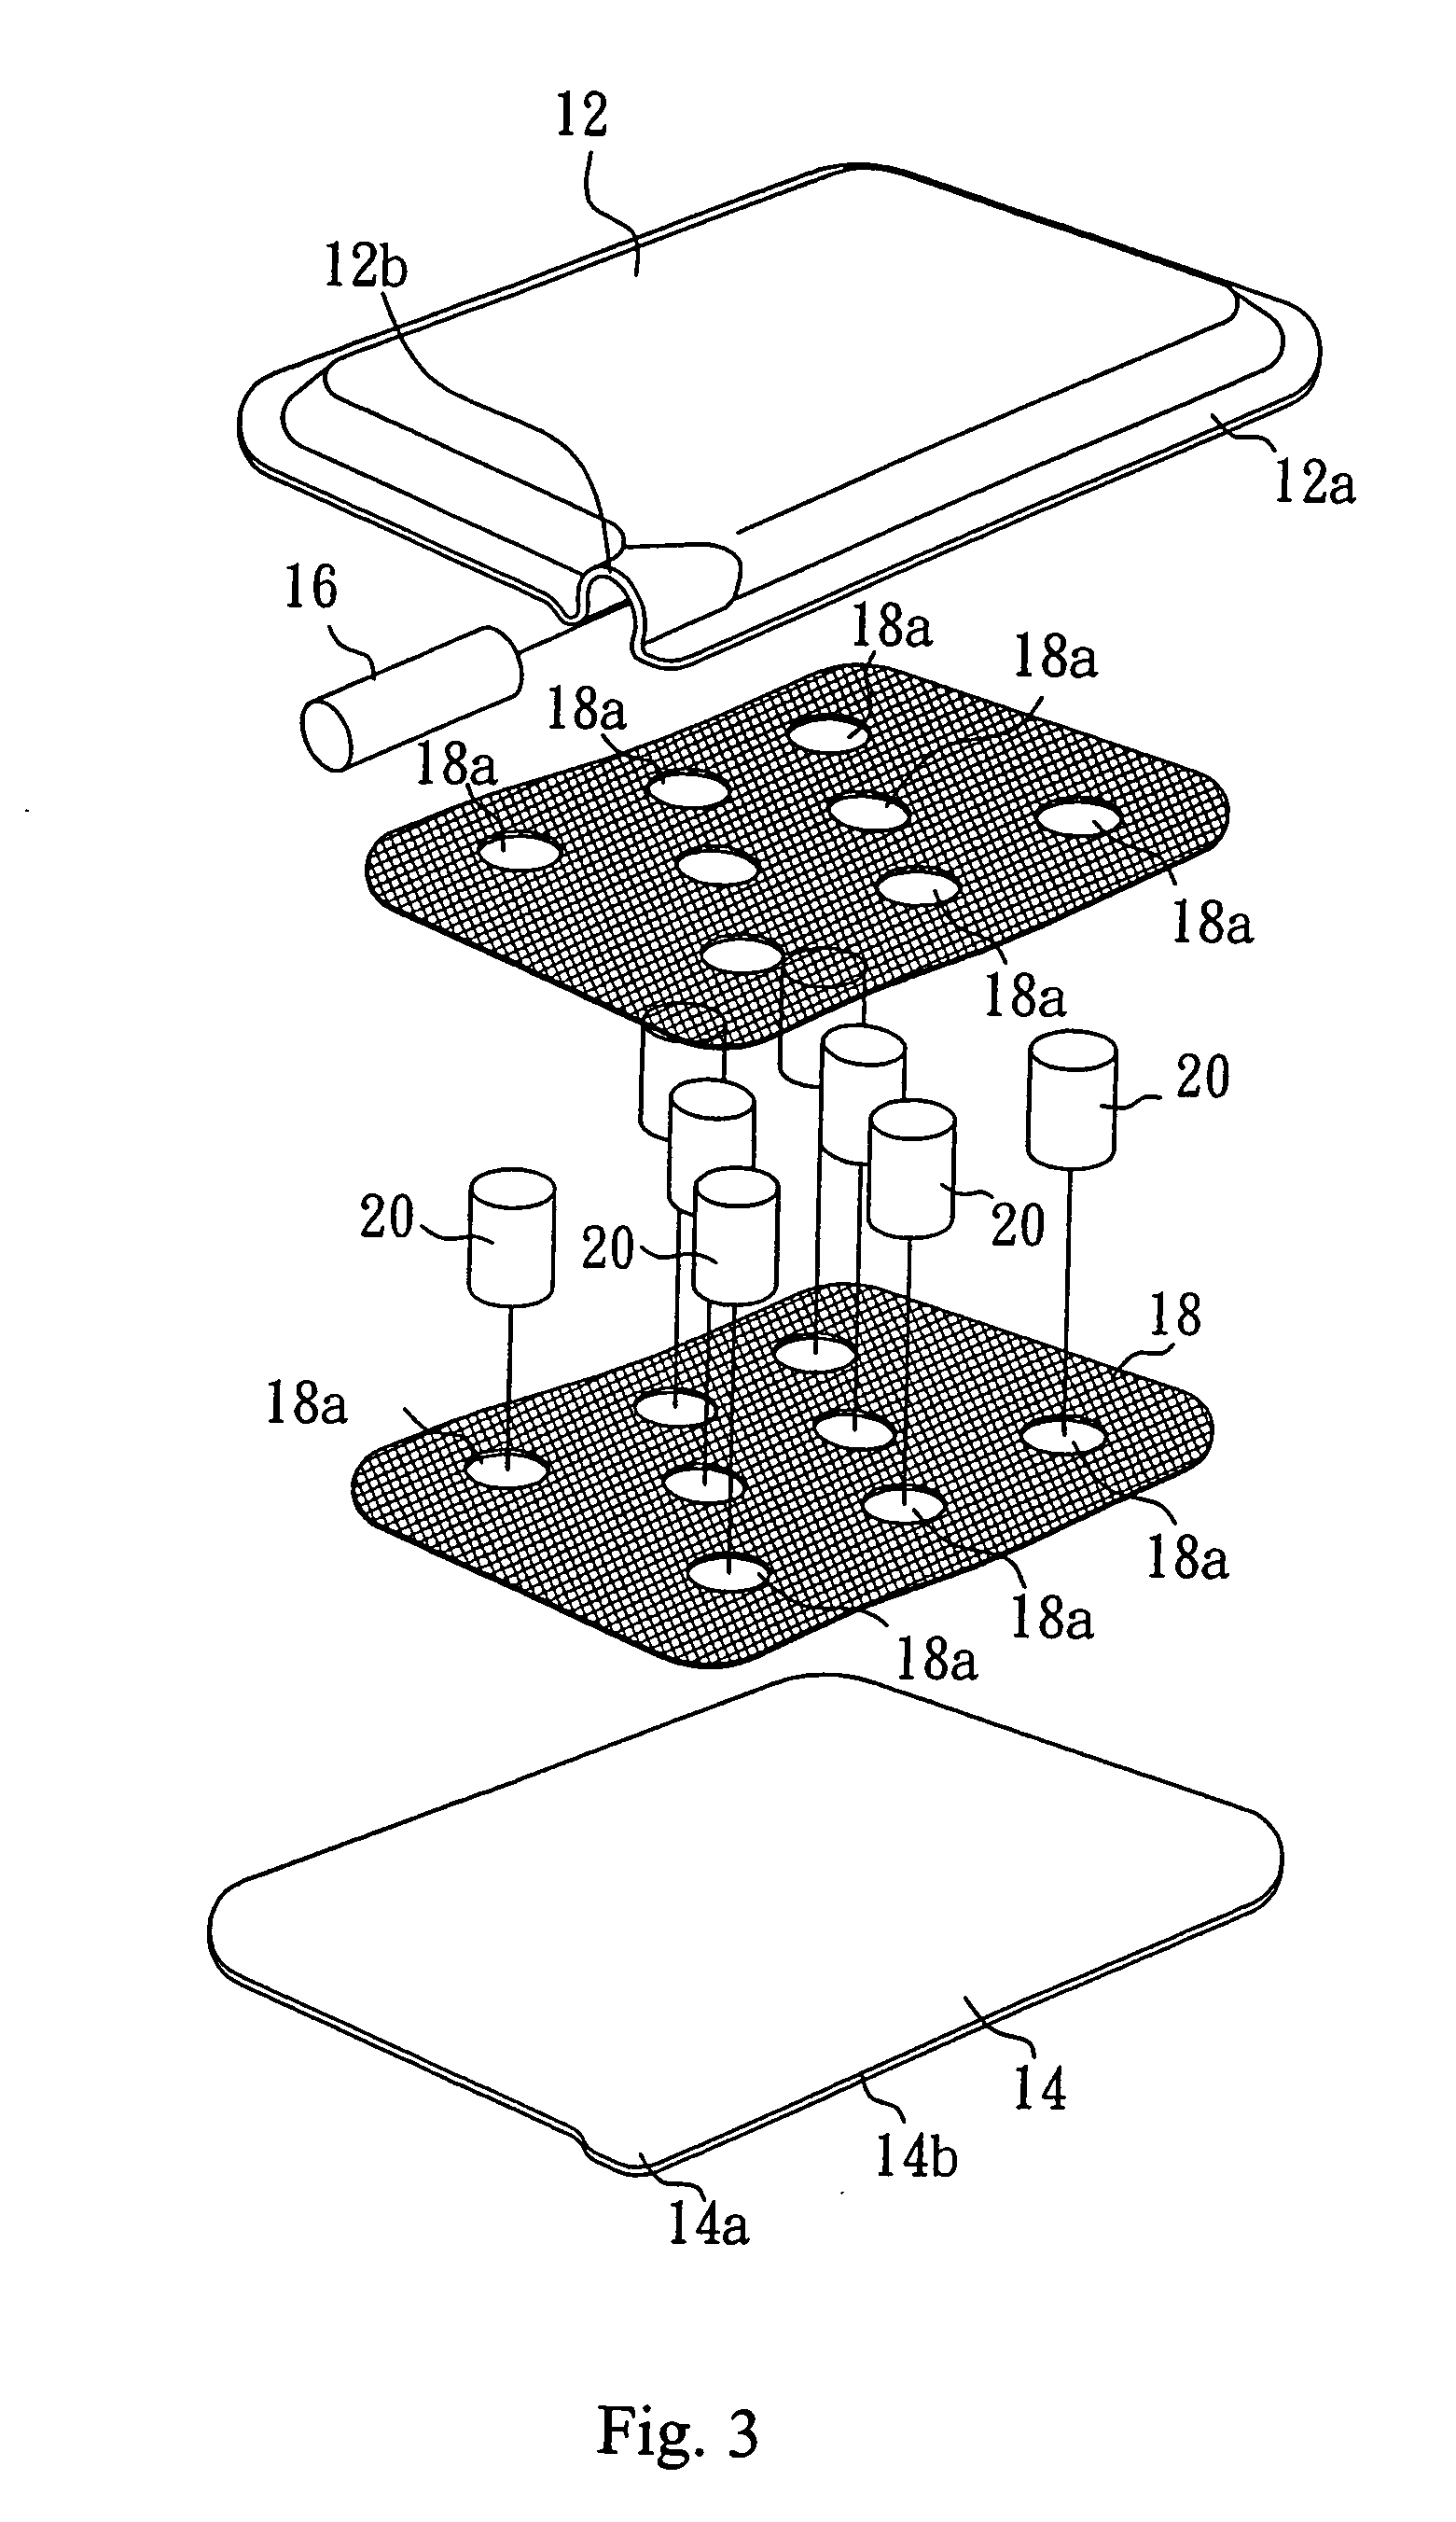 Bendable heat spreader with metallic wire mesh-based microstructure and method for fabricating same